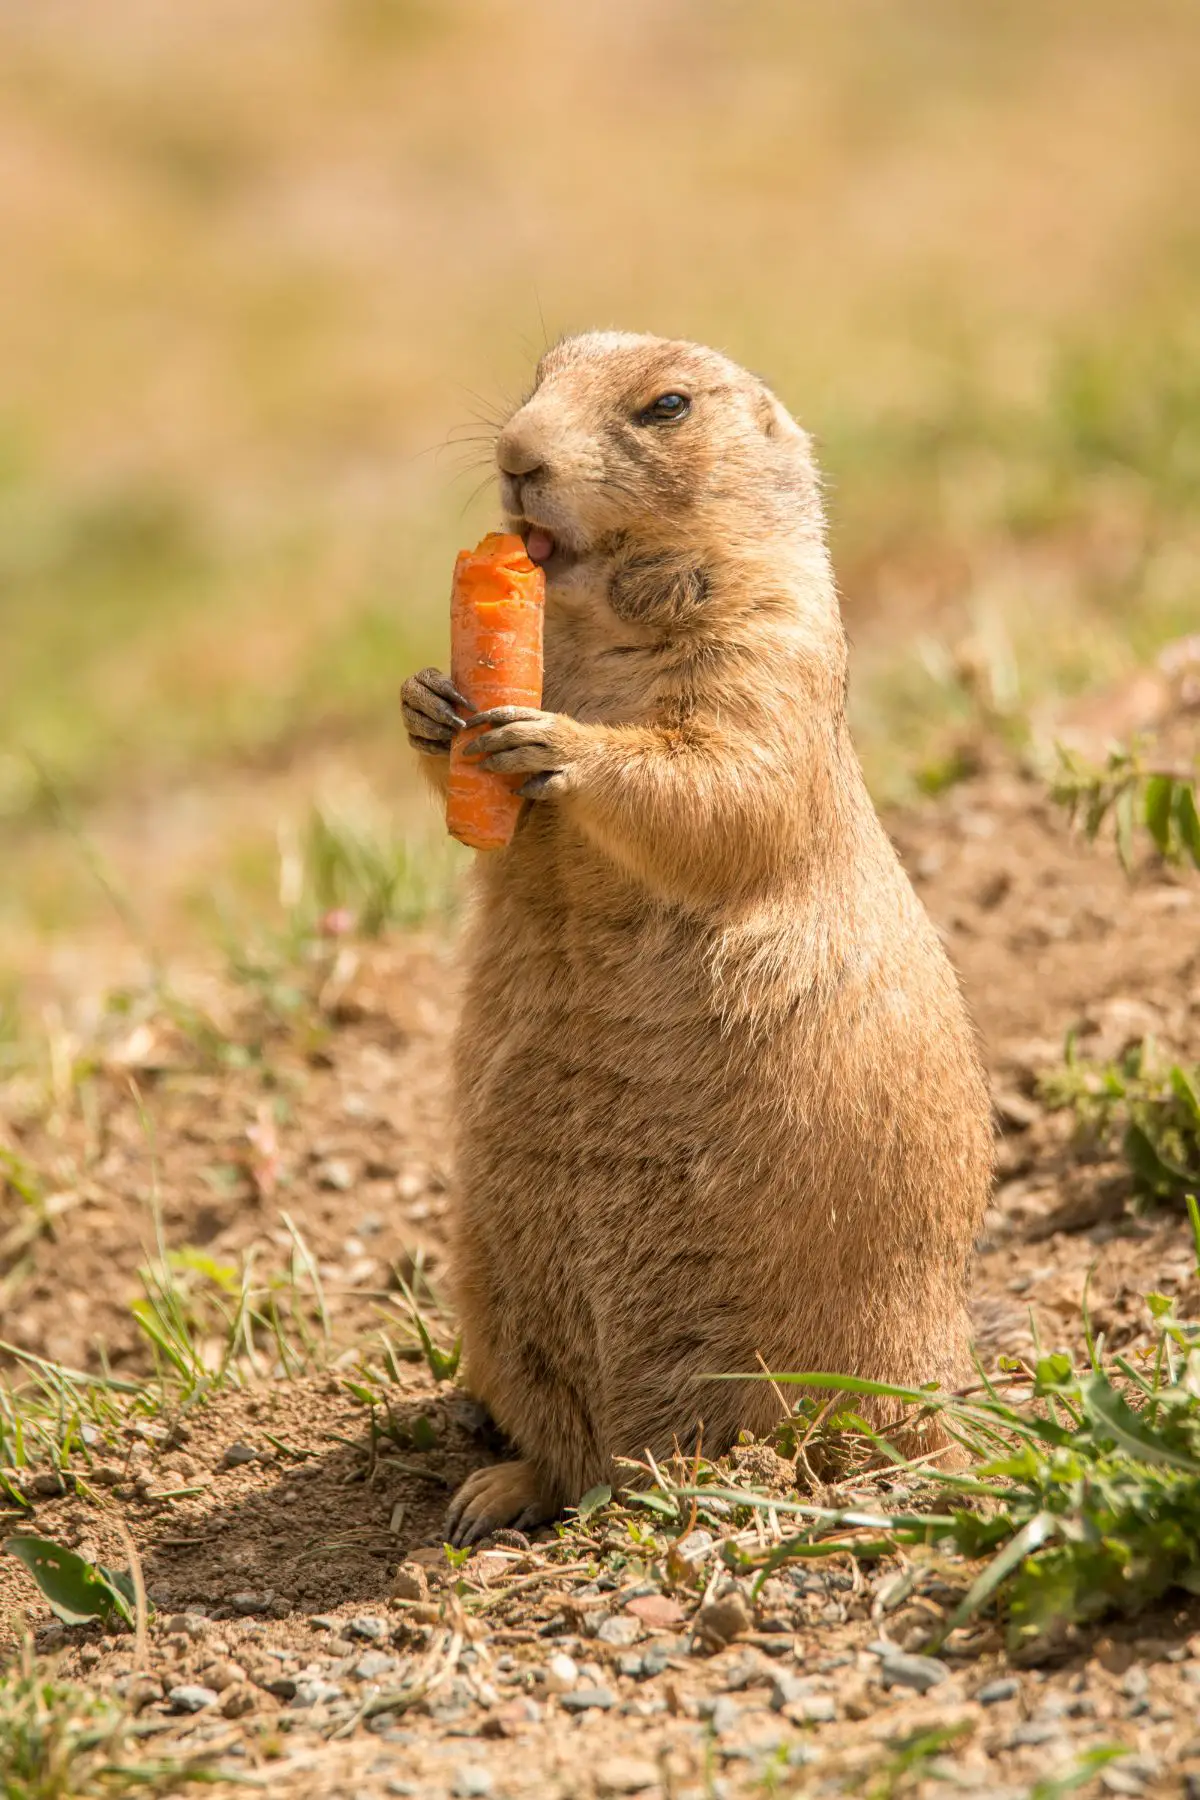 A groundhog sitting up eating a carrot.